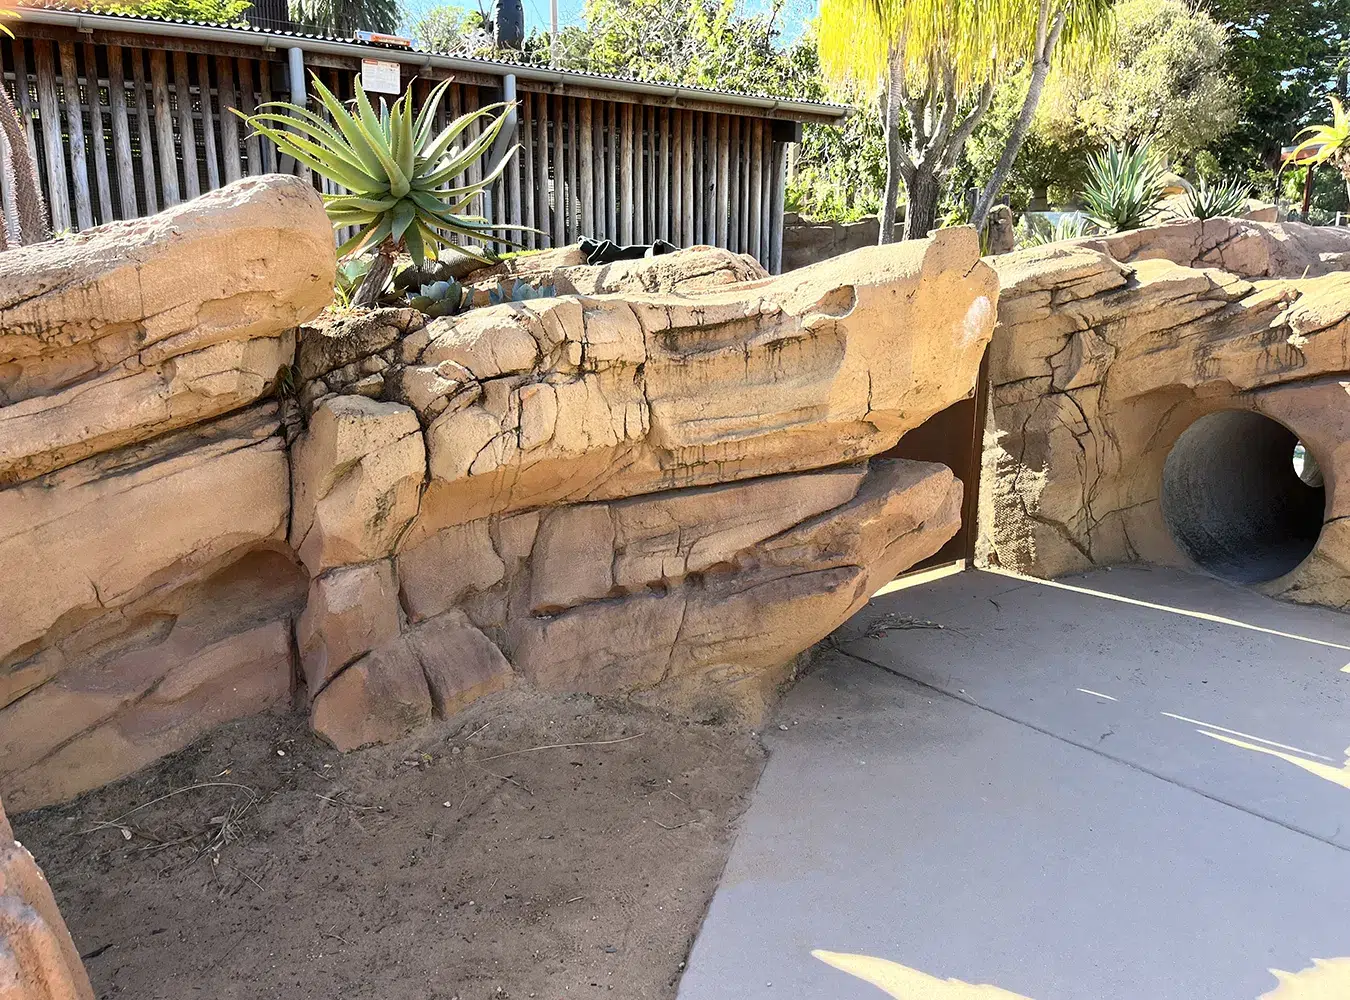 Desert-themed landscaping with aloe plants atop sandstone rock formations.